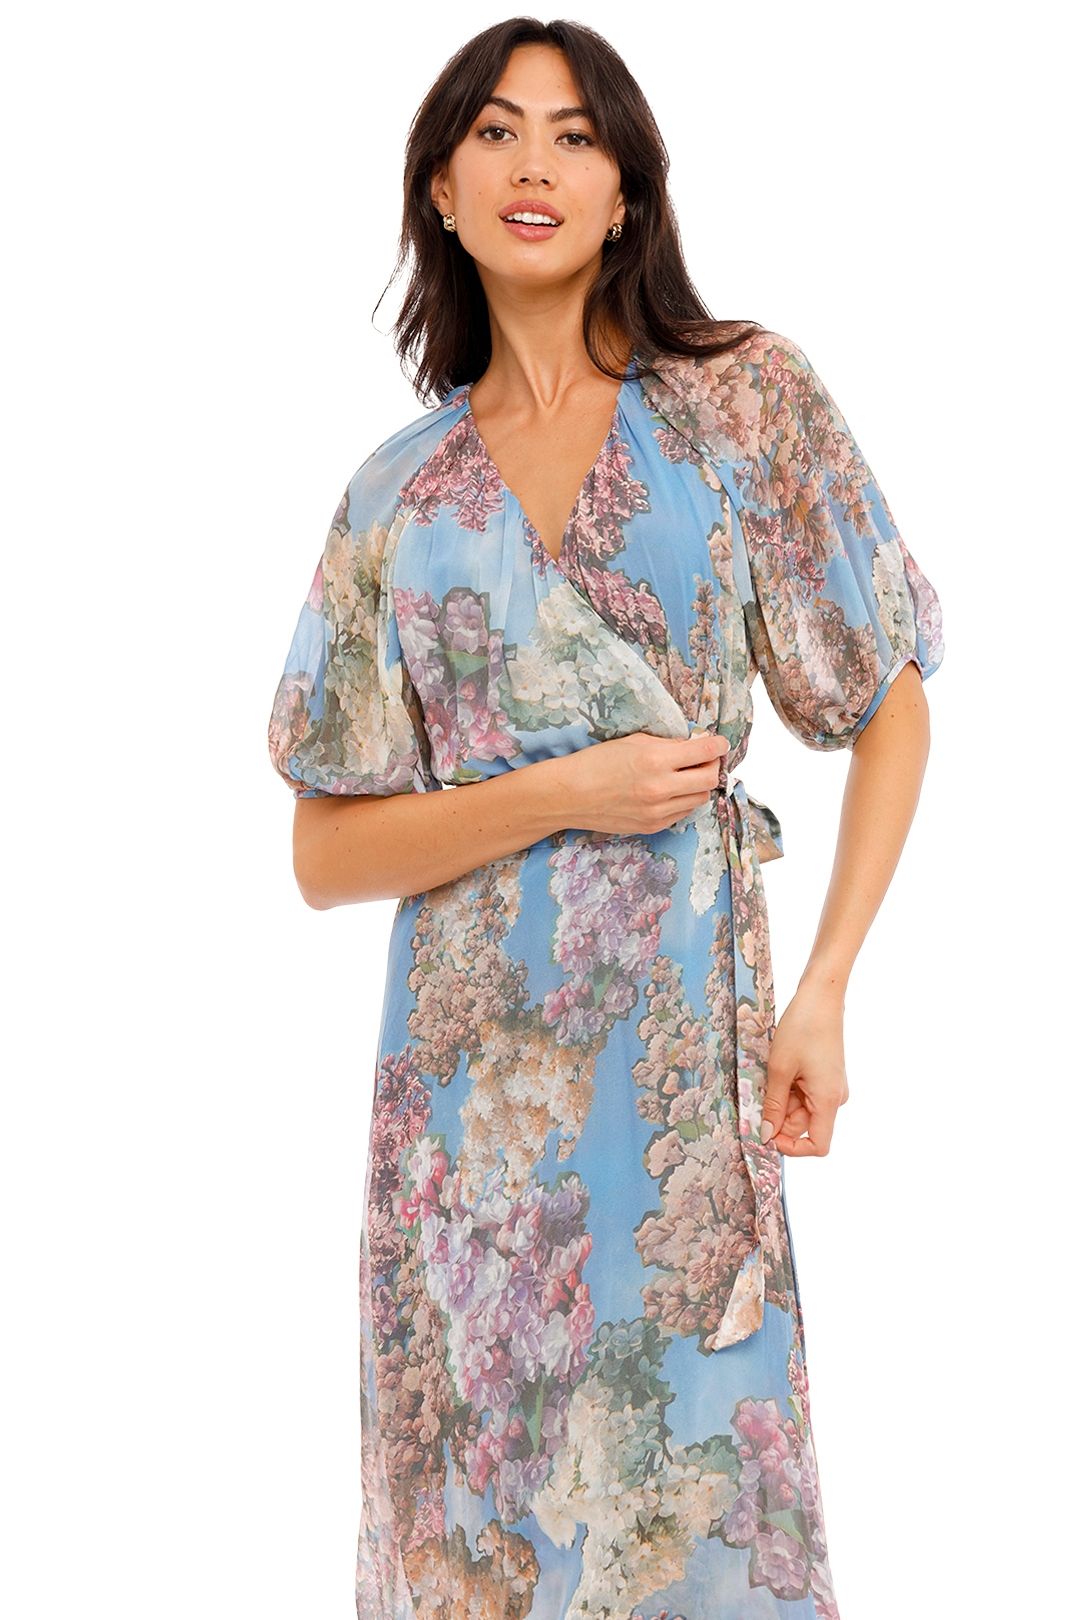 Ginger and Smart New Romantic Wrap Dress floral